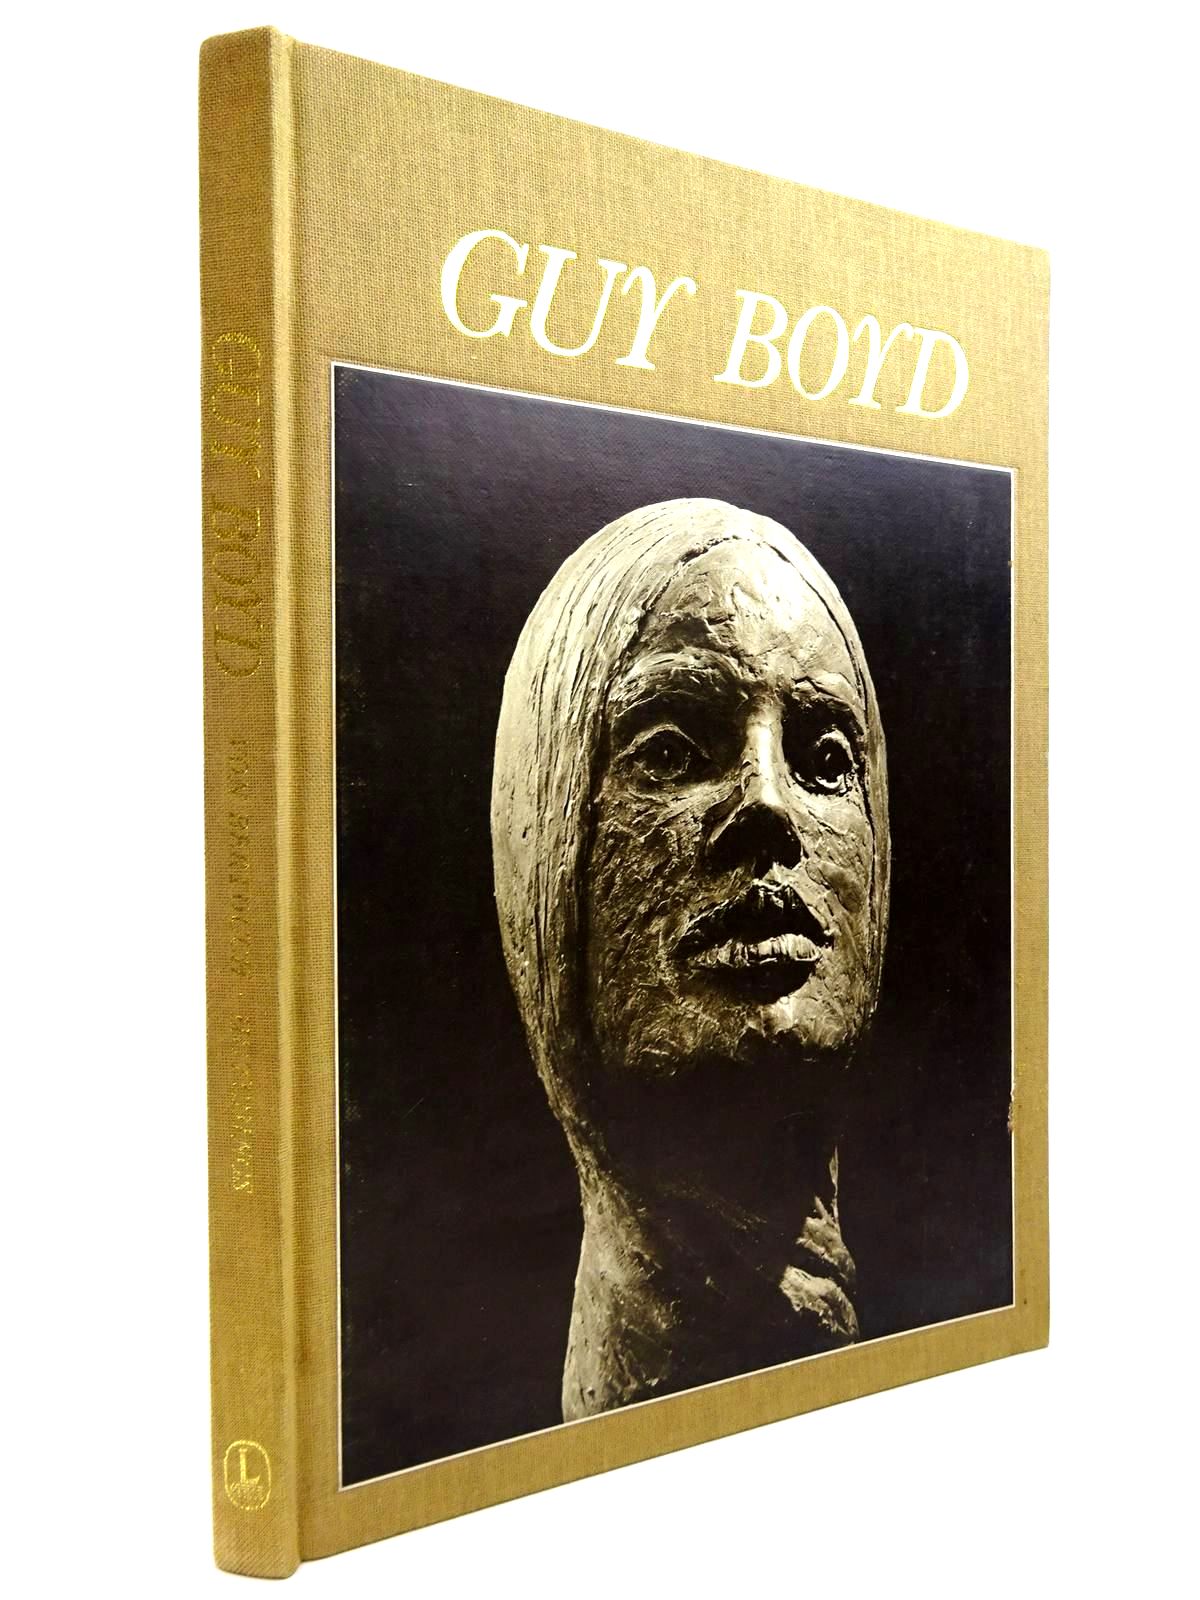 Photo of GUY BOYD written by Von Bertouch, Anne Hutchings, Patrick published by Lansdowne Press (STOCK CODE: 2130755)  for sale by Stella & Rose's Books